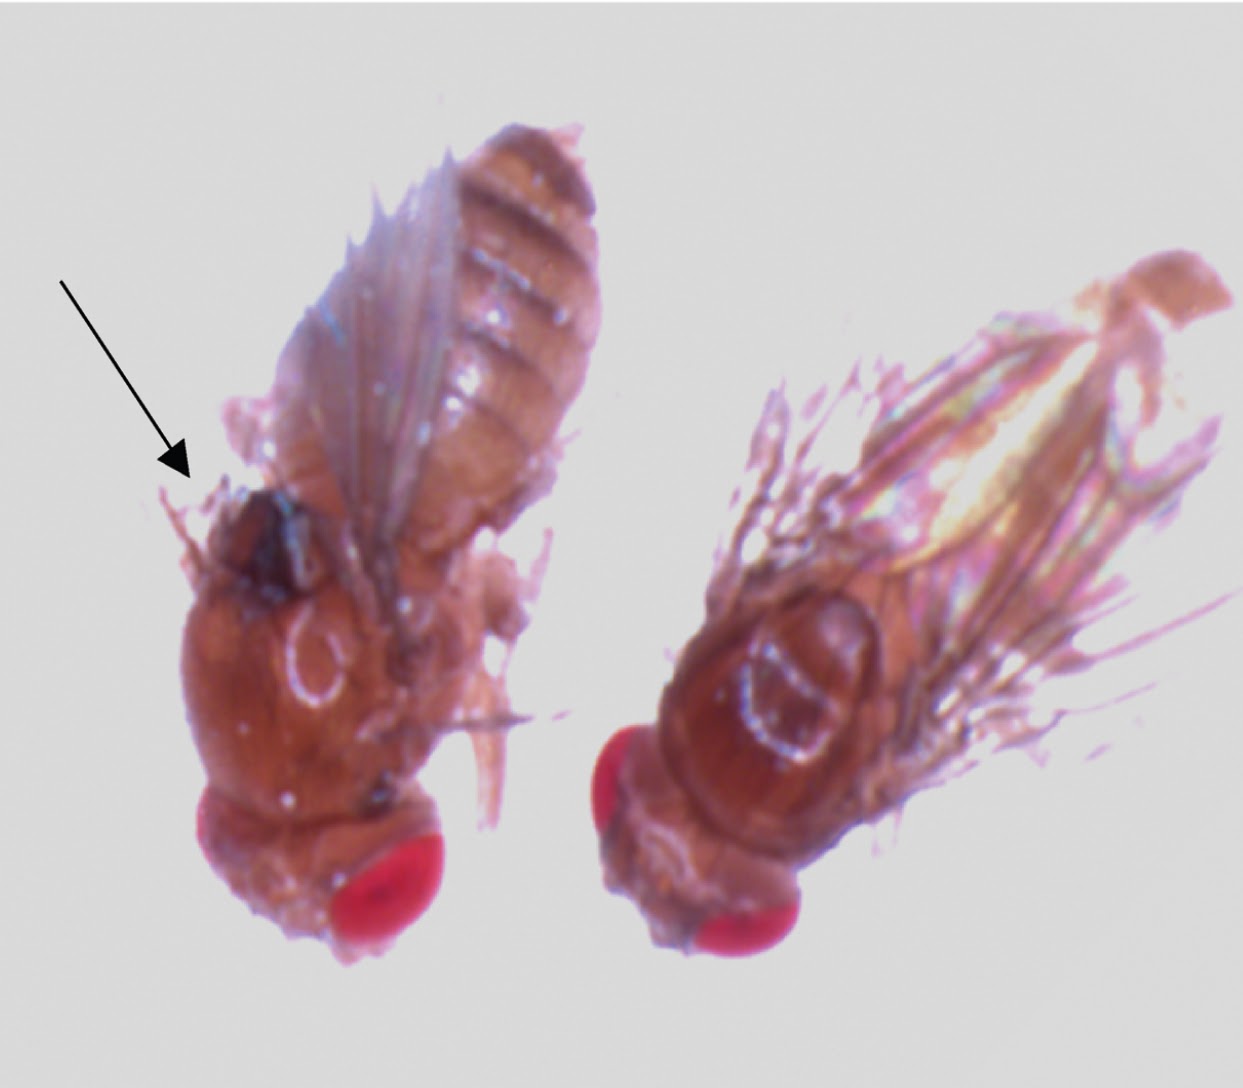 Wild-type fly pricked with 2.6 μg μl−1 rPrtS-E168A